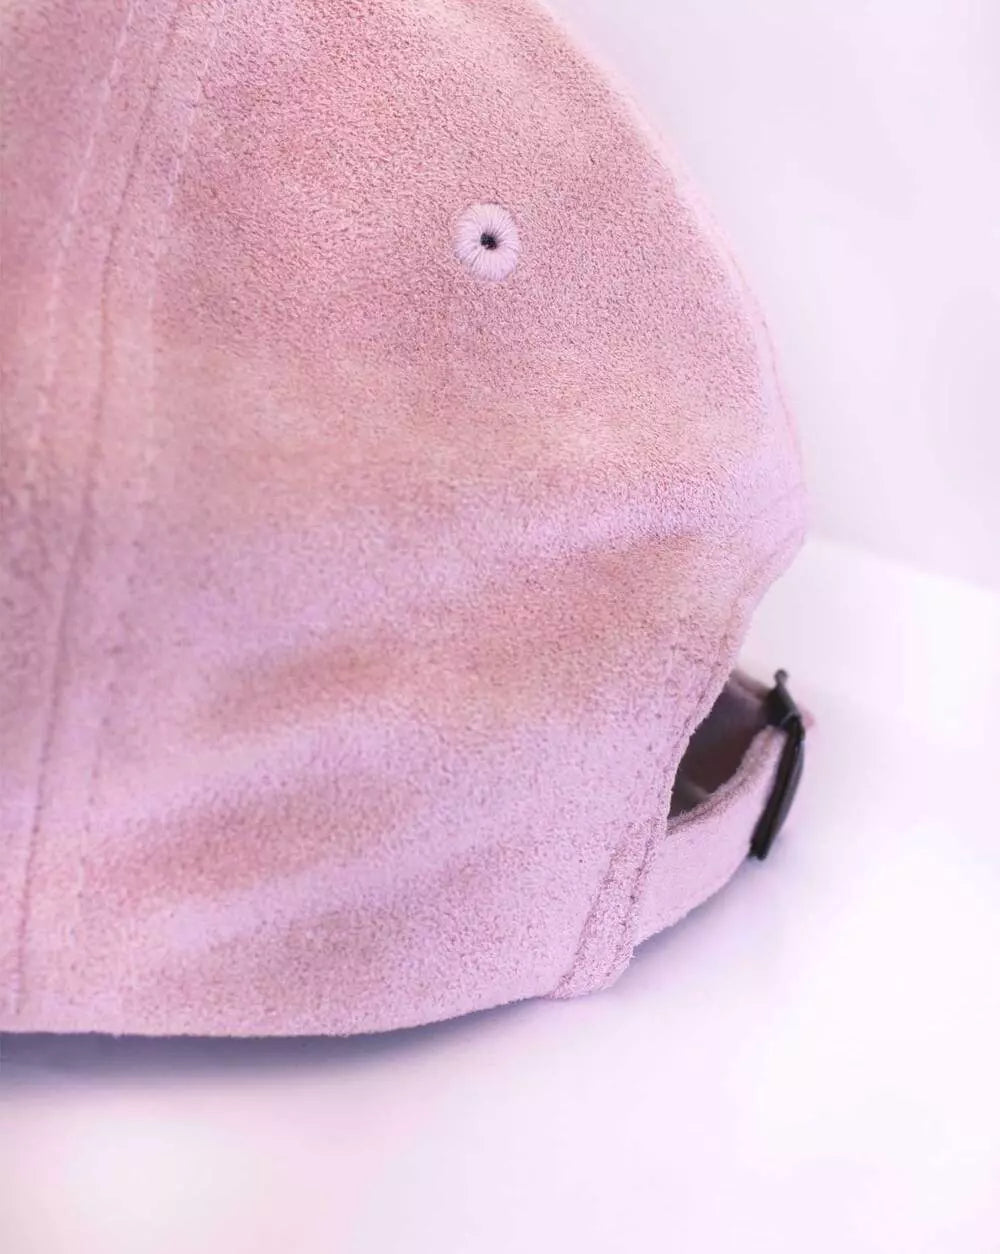 Cap Forever is Boring Pink Velour with adjustable strap in the back.